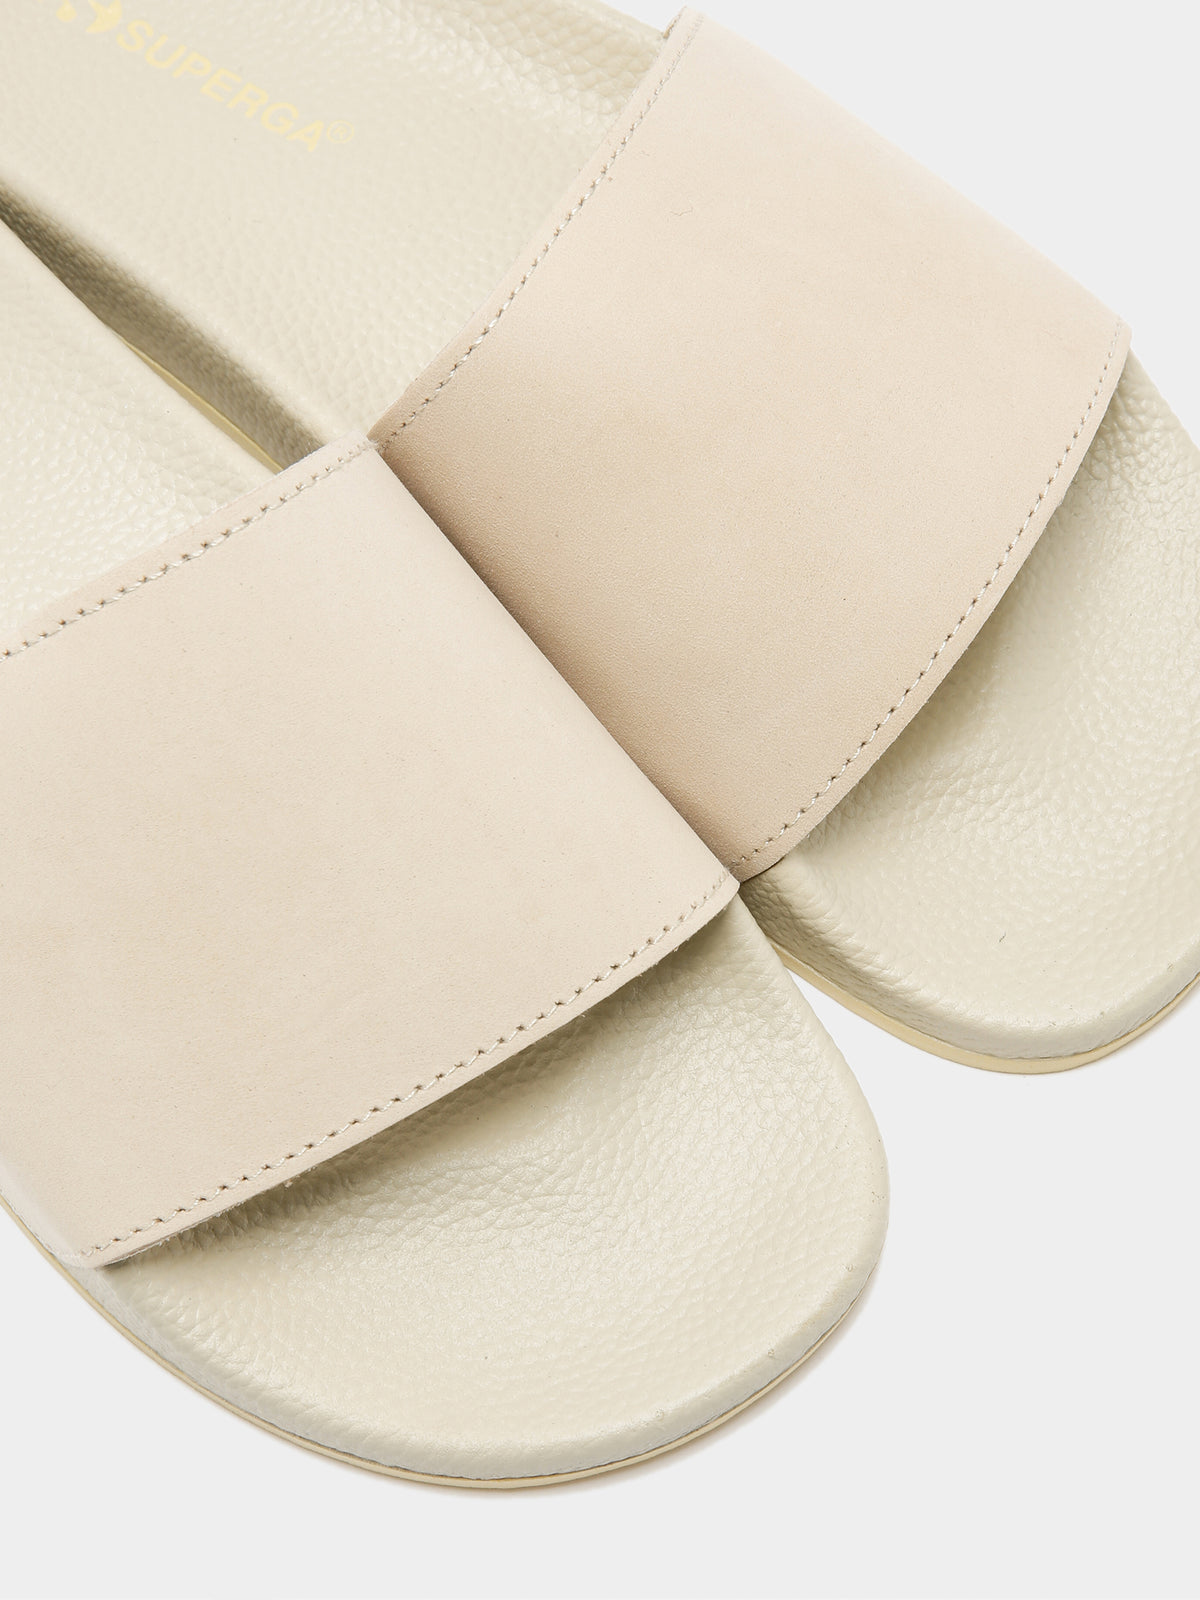 Womens 1908 Buttersoft Slides in Off White